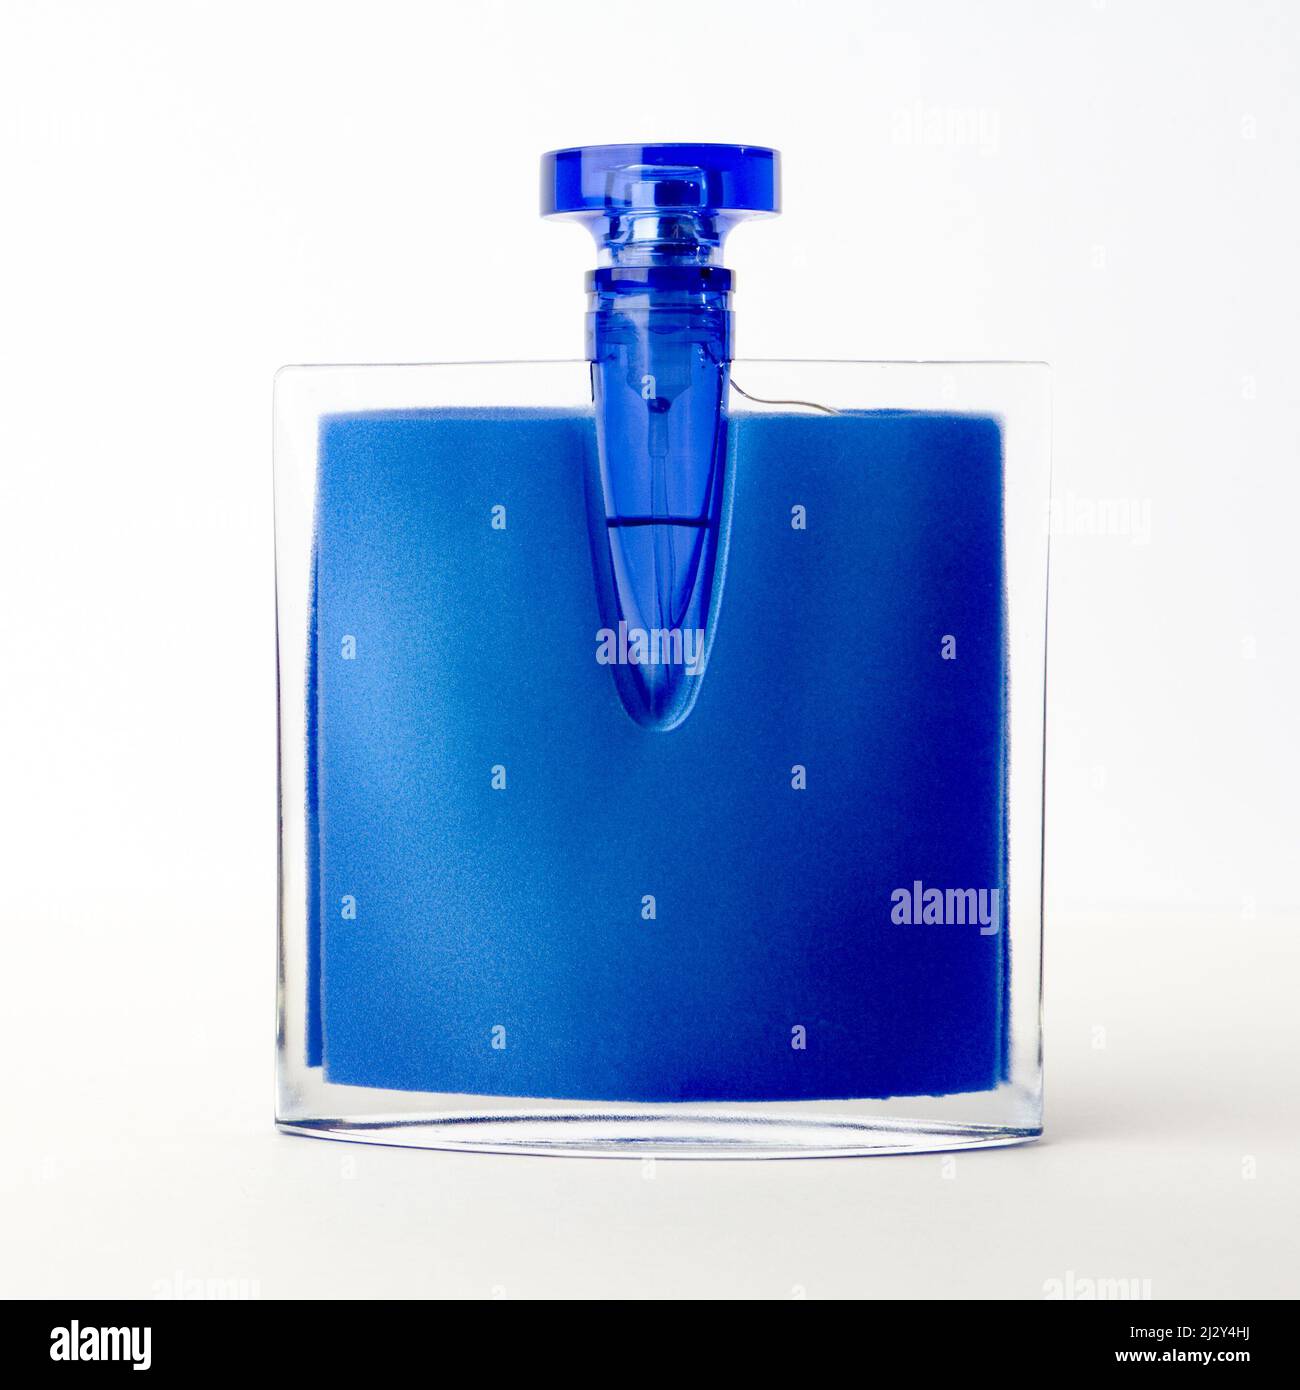 Blue Perfume Bottle. An unbranded perfume bottle isolated against a white background. Stock Photo